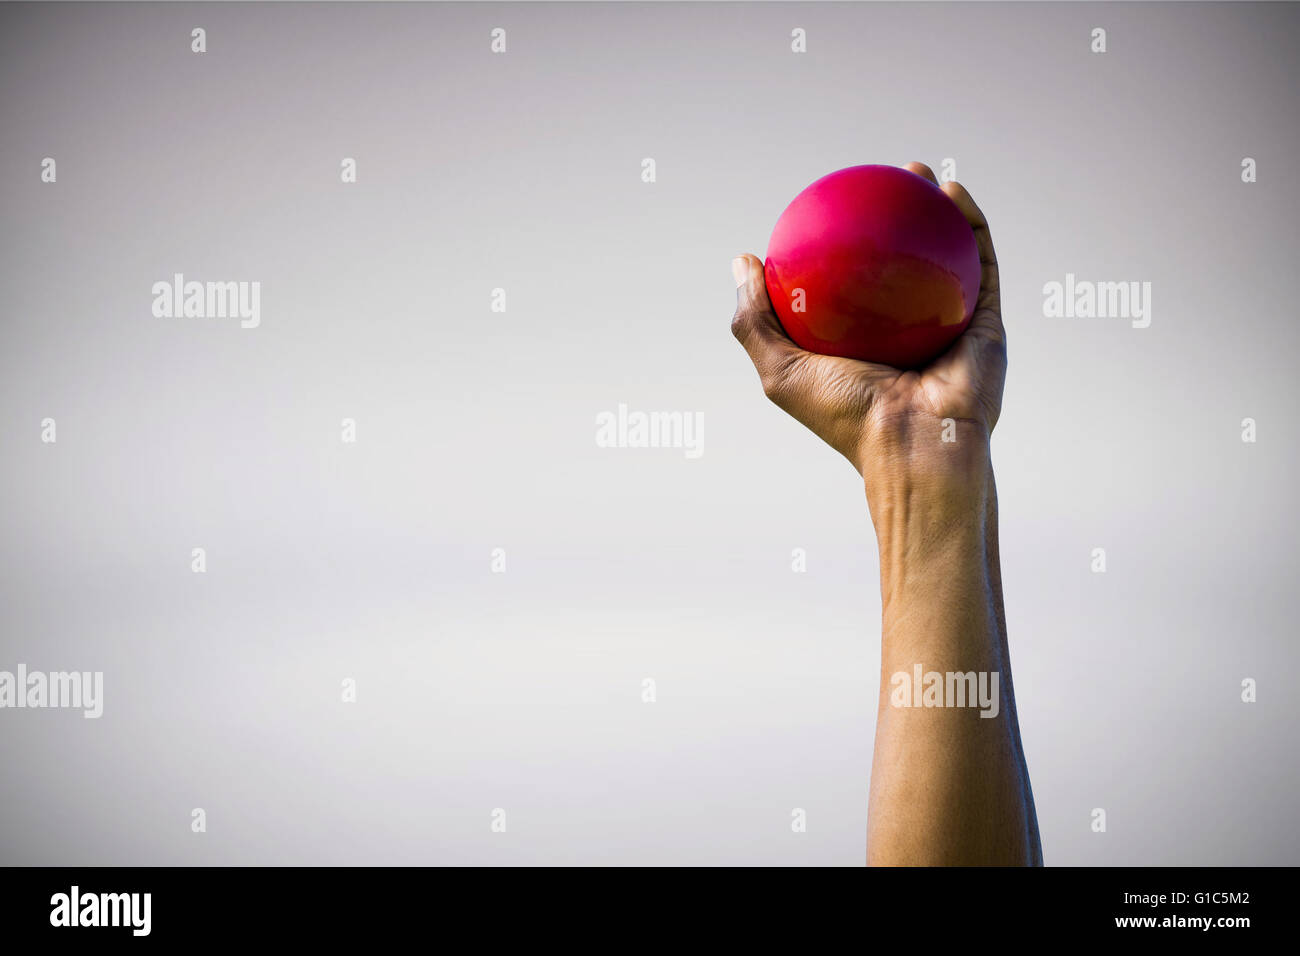 Composite image of hand holding a red ball Stock Photo